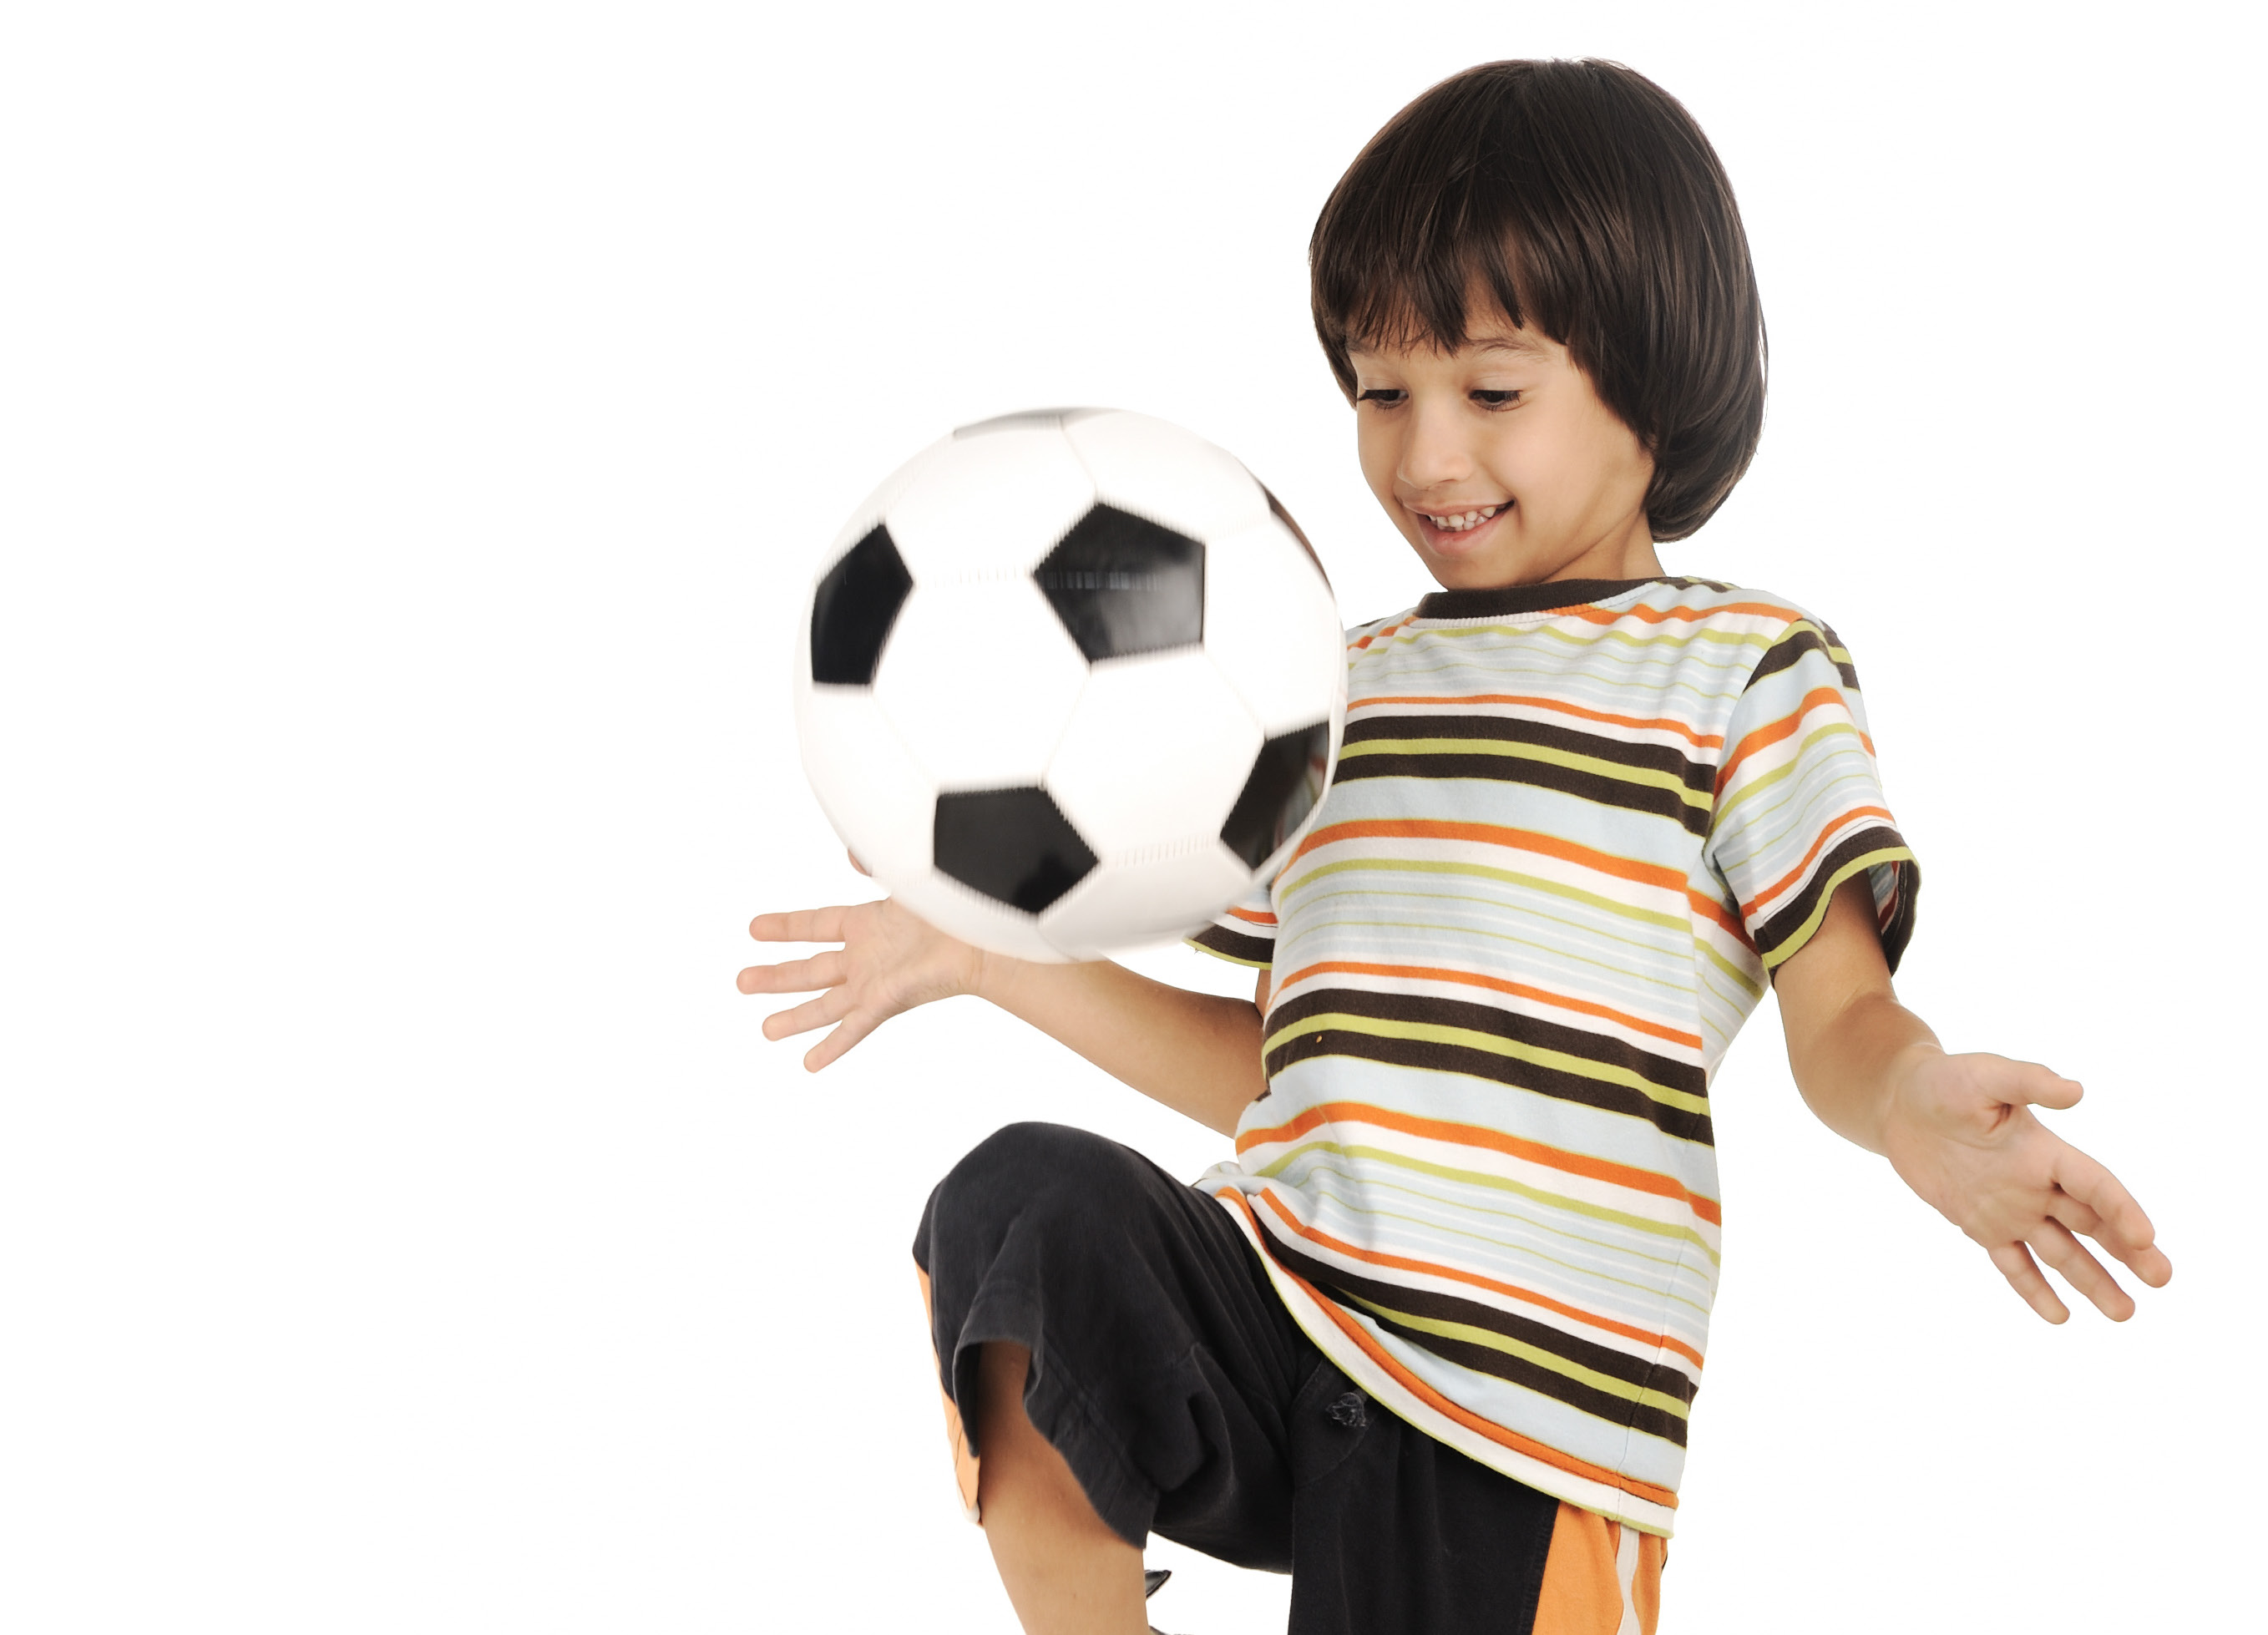 Physical activity: Give your child toys that encourage physical activity like